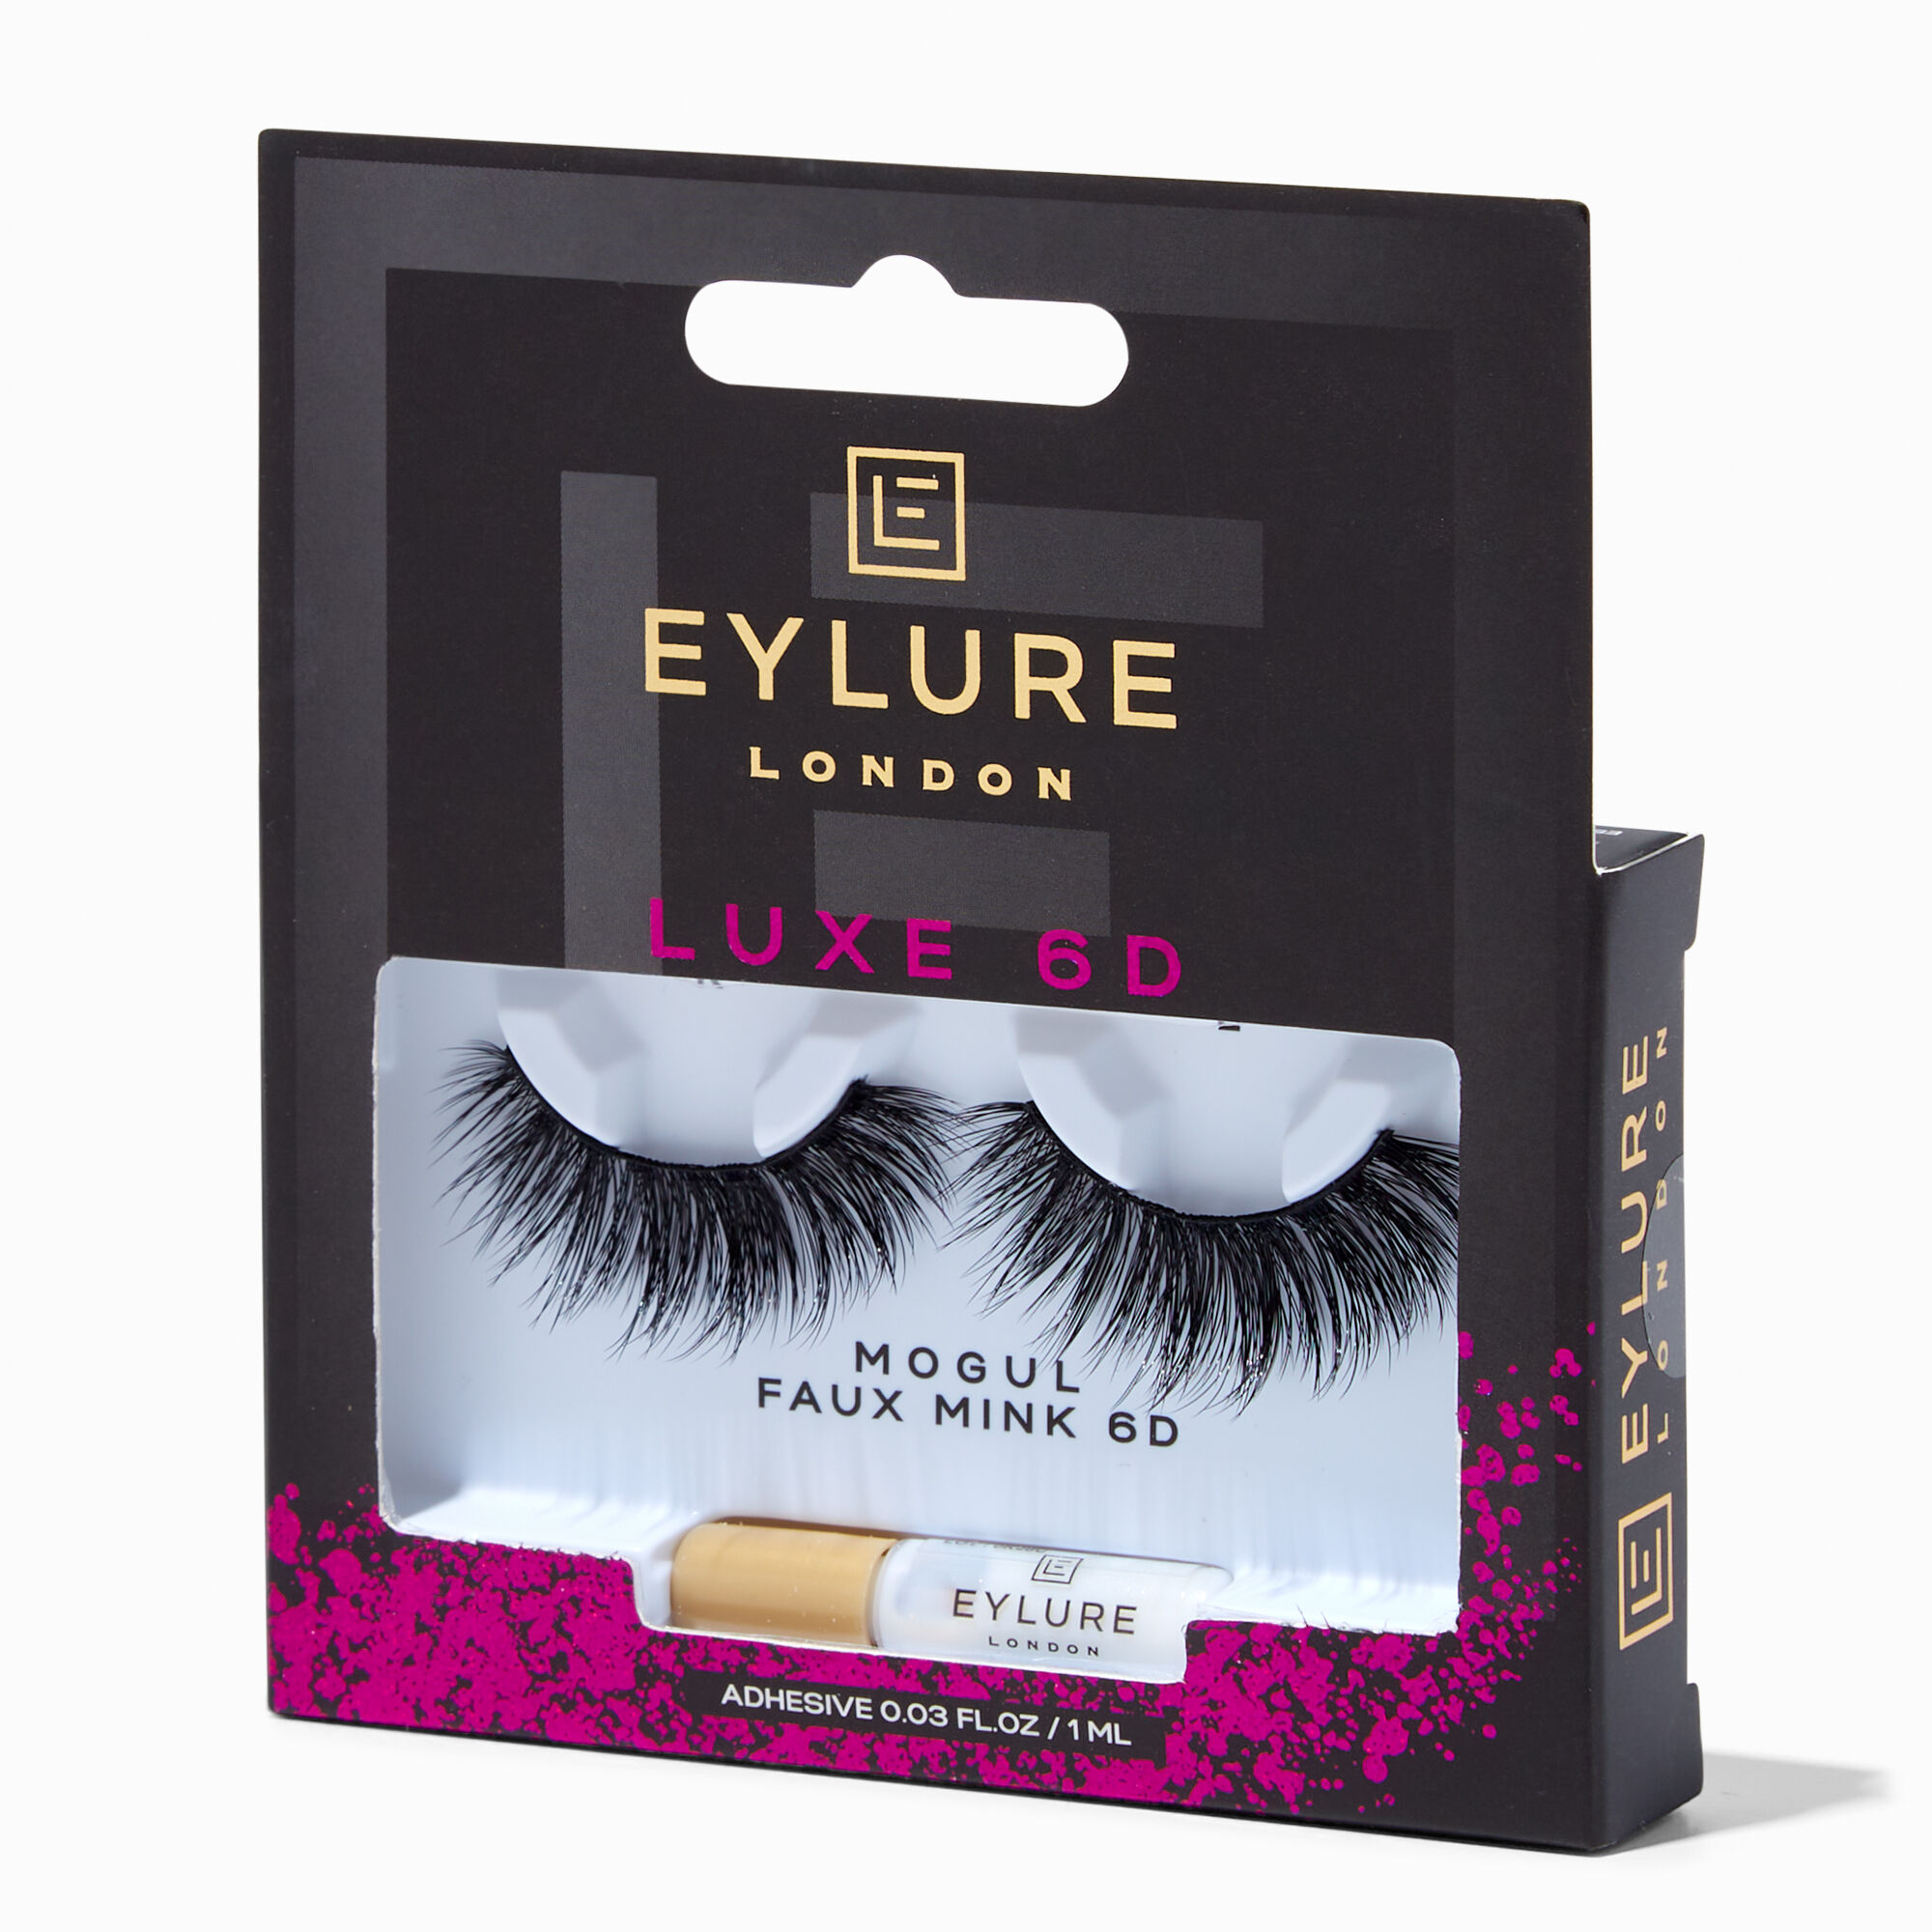 View Claires Eylure Luxe 6D Faux Mink Eyelashes Mogul Black information